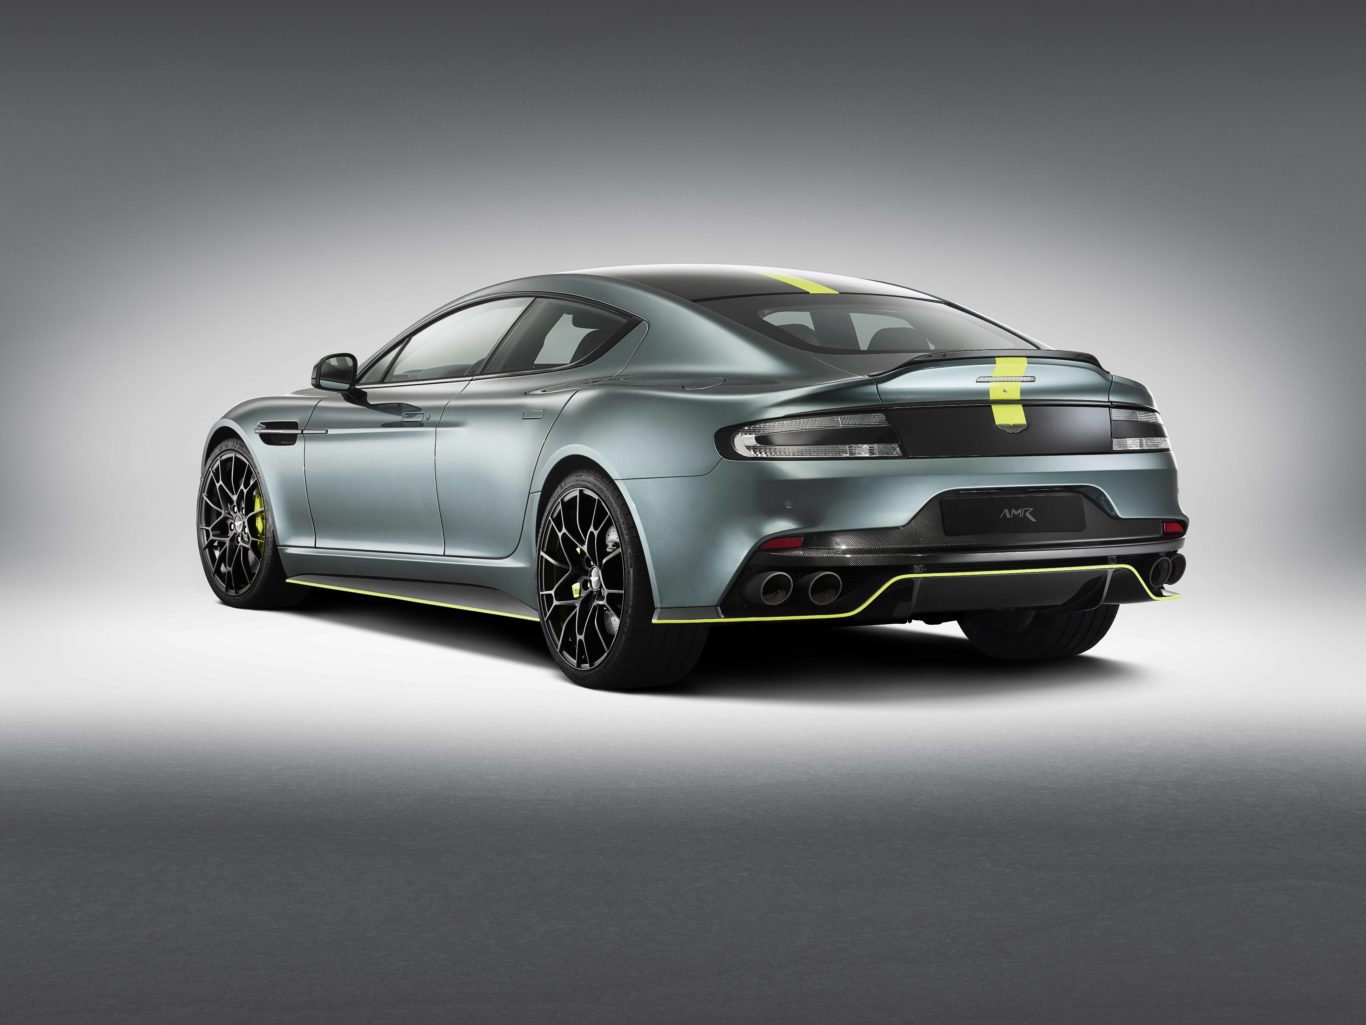 The Rapide AMR features an all-new exhaust system